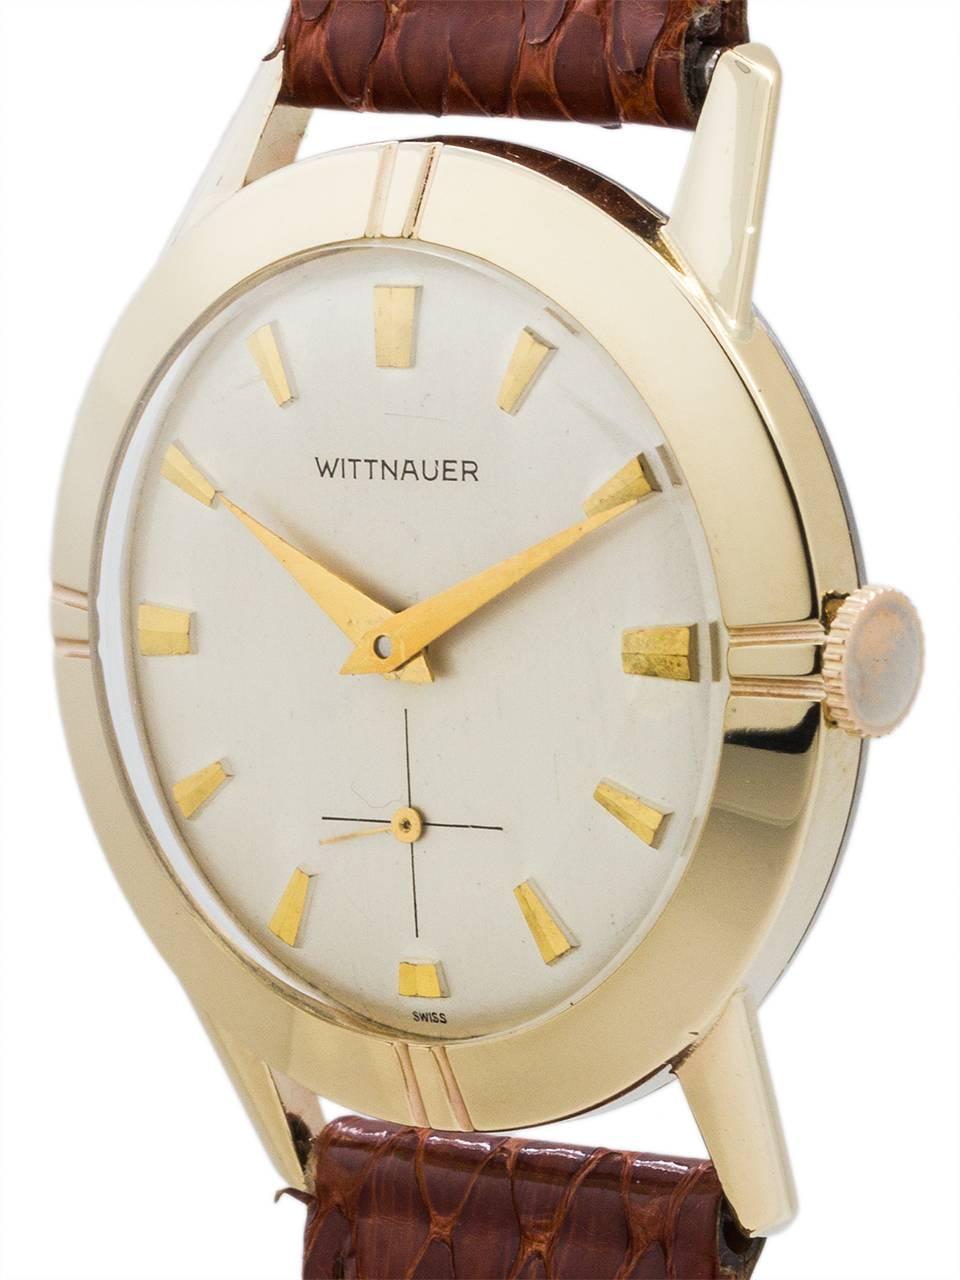 Modernist design Wittnauer 17 jewel manual wind dress mode circa 1950’s. Featuring 33 x 39mm case with extended lugs and wide sloped bezel with fluted design at 1/4’s. With acrylic crystal and very clean original silver satin dial with gold raised